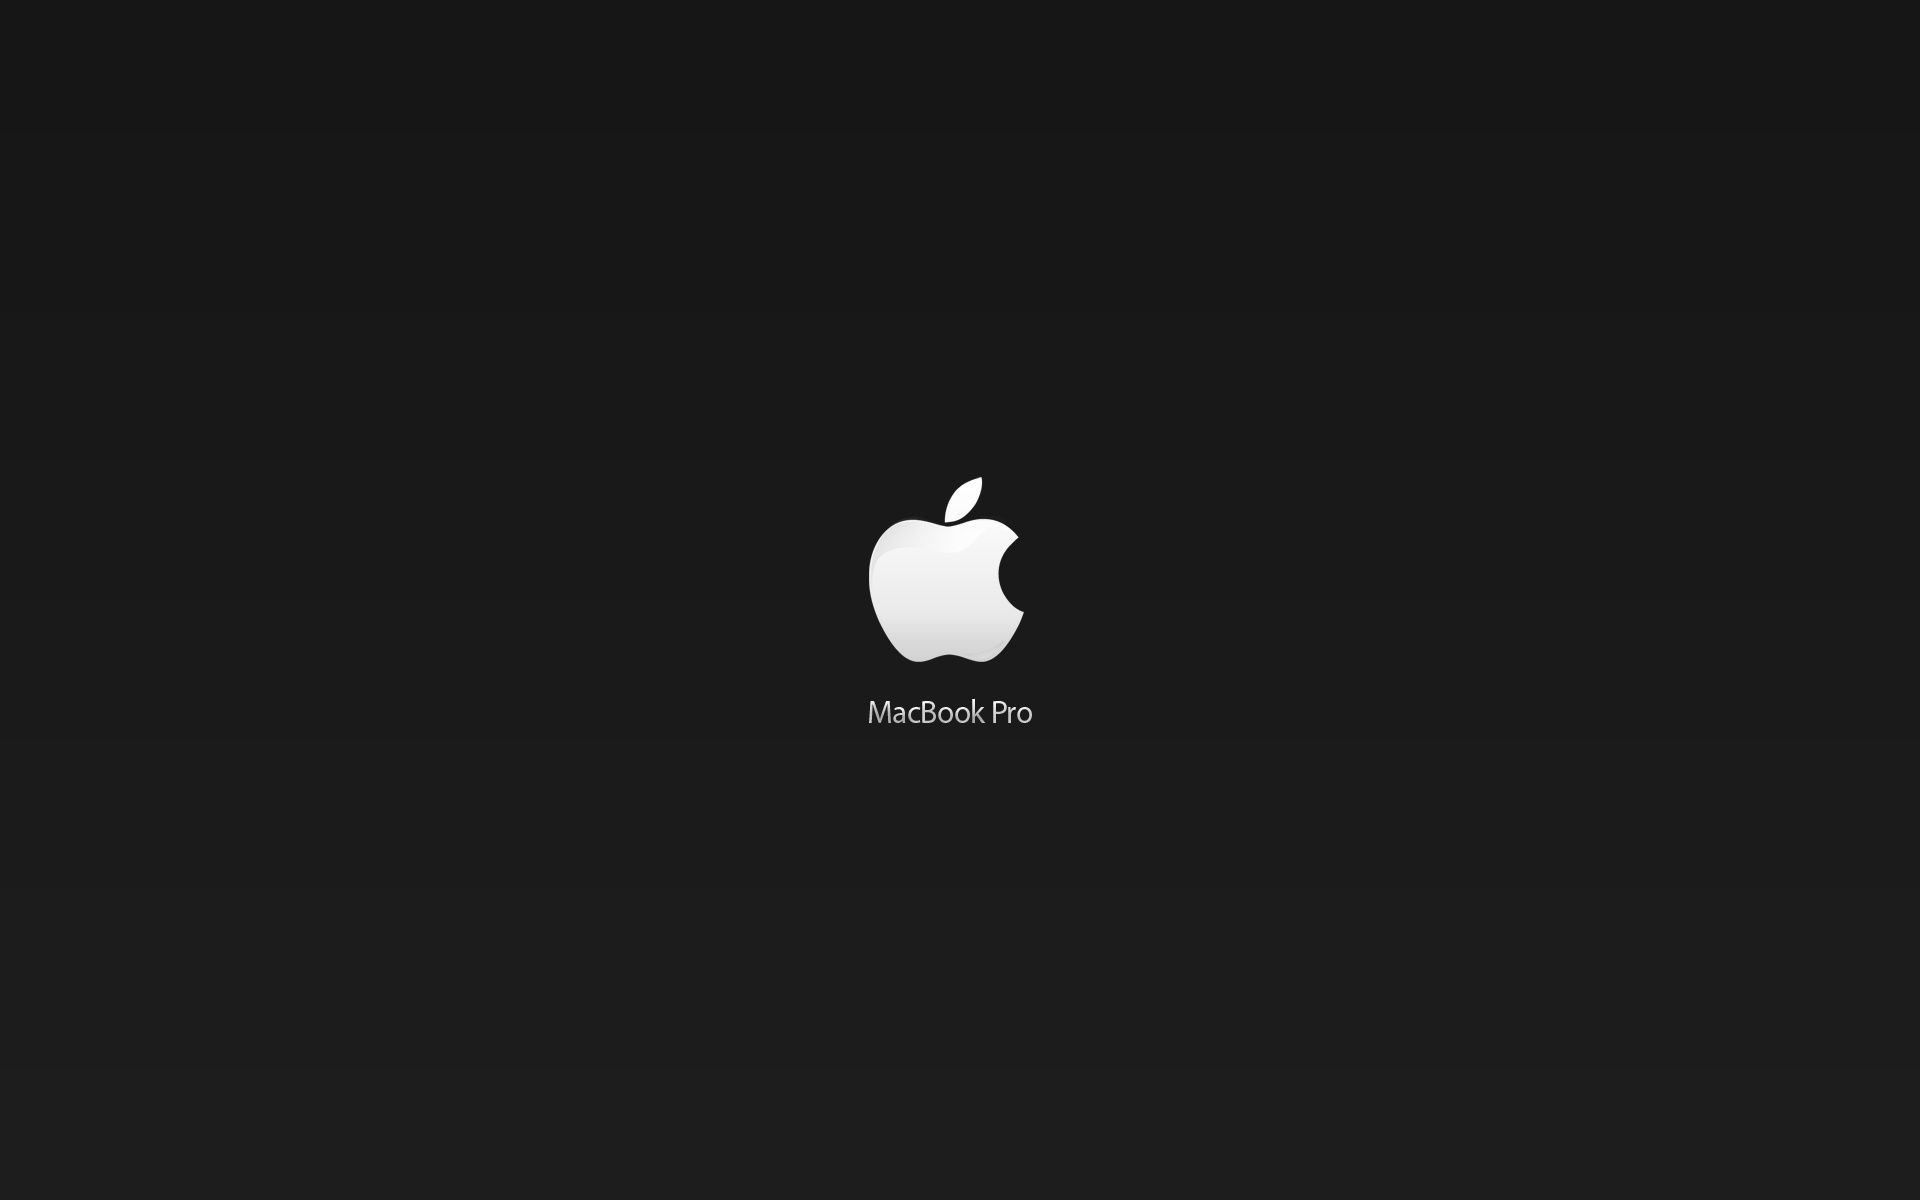 Wallpaper For Macbook Pro 13 Inch (43+ images)